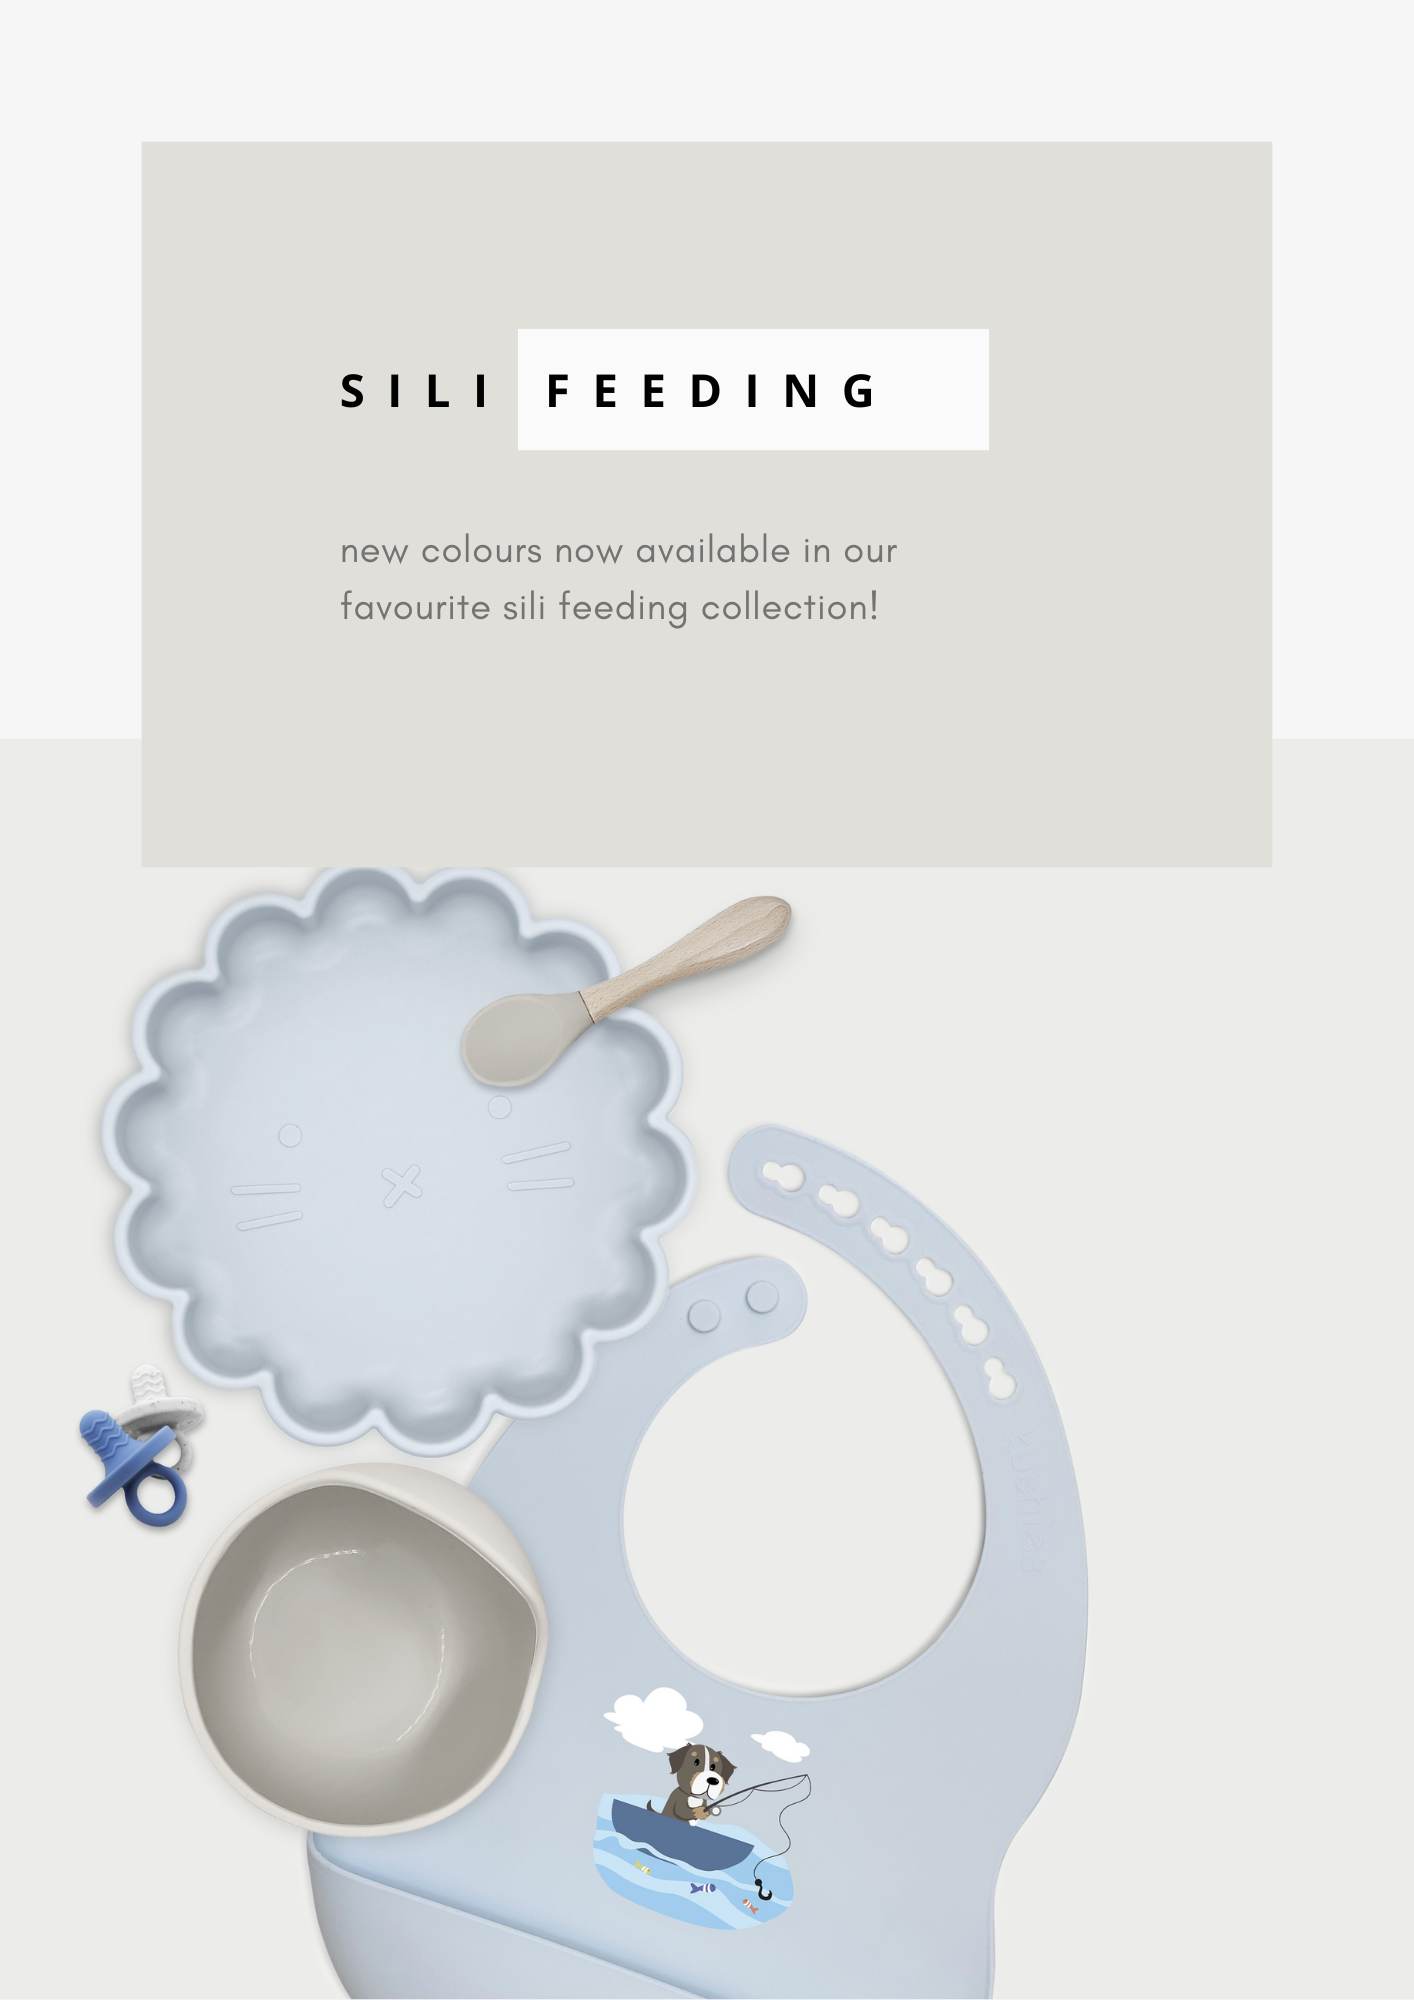 new colours now available in our favourite sili feeding collection!